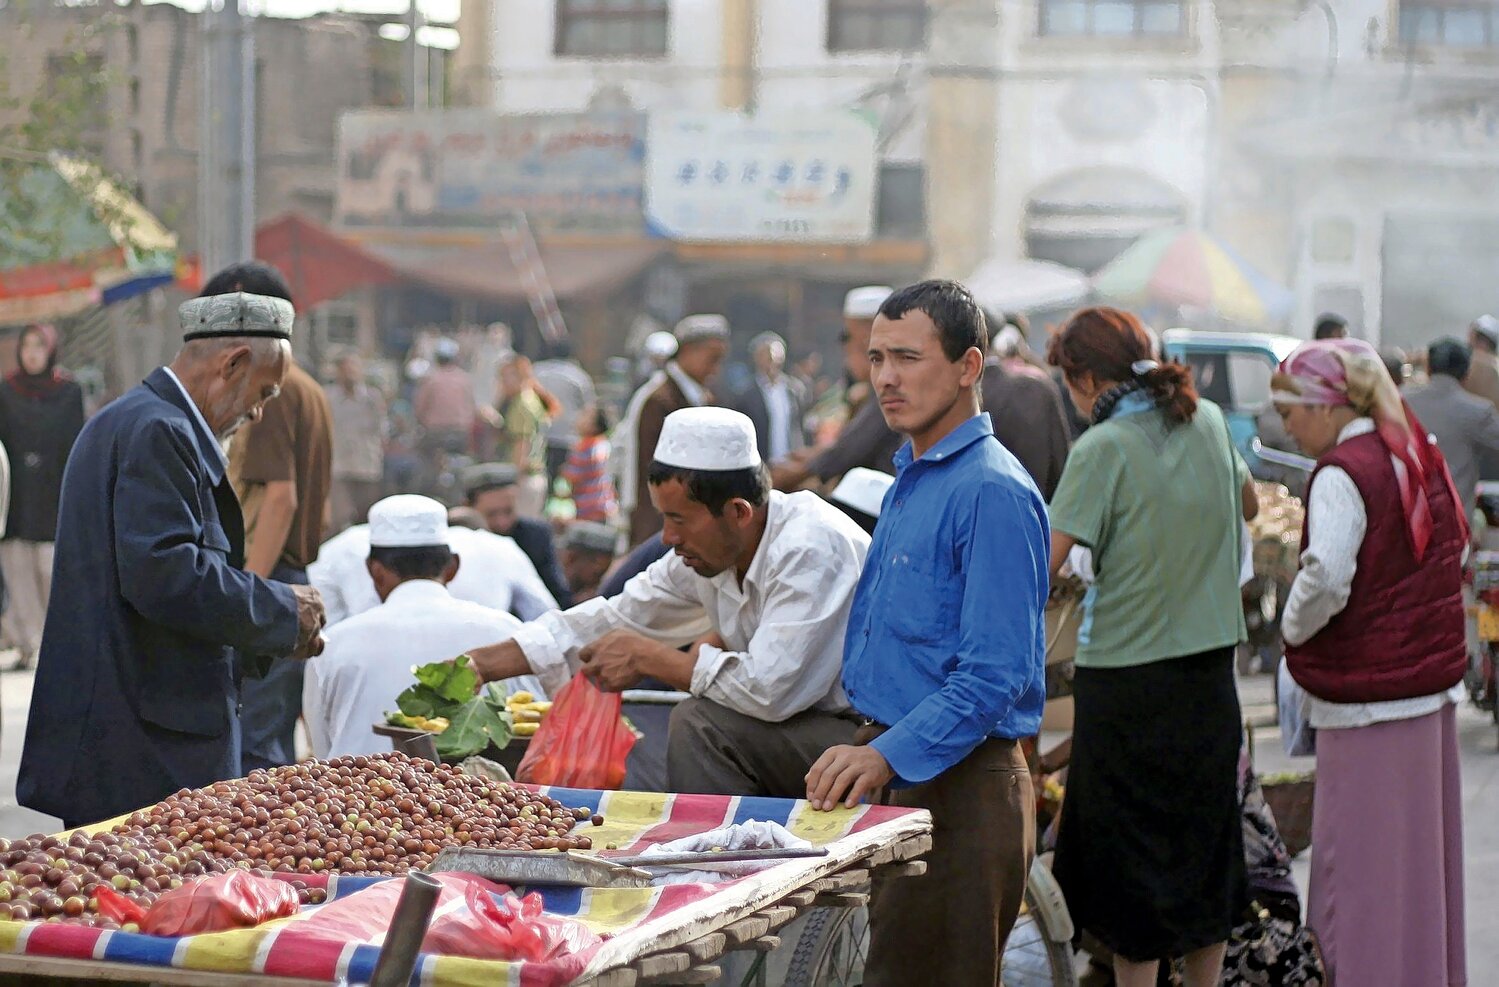 Uyghurs in a market in the city of Kashgar, in the west of Xinjiang, China on Sept. 17, 2005.